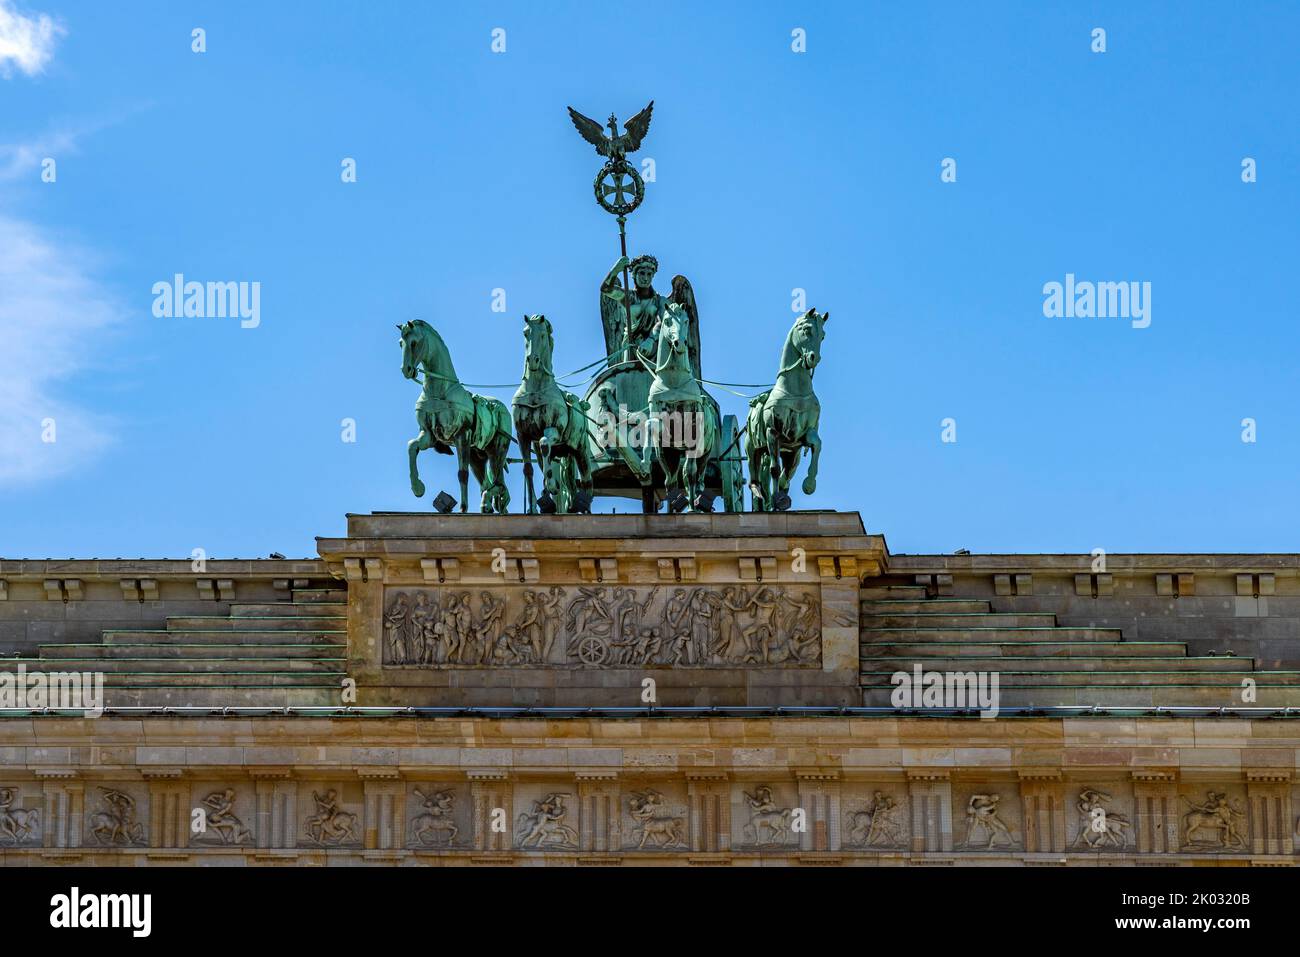 Quadriga on the Brandenburg Gate built in the years 1789 to 1793. The Brandenburg Gate in Berlin is an early classicist triumphal gate, which stands on Pariser Platz in Berlin's Mitte district. The gate is the only preserved of last 18 Berlin city gates. Stock Photo